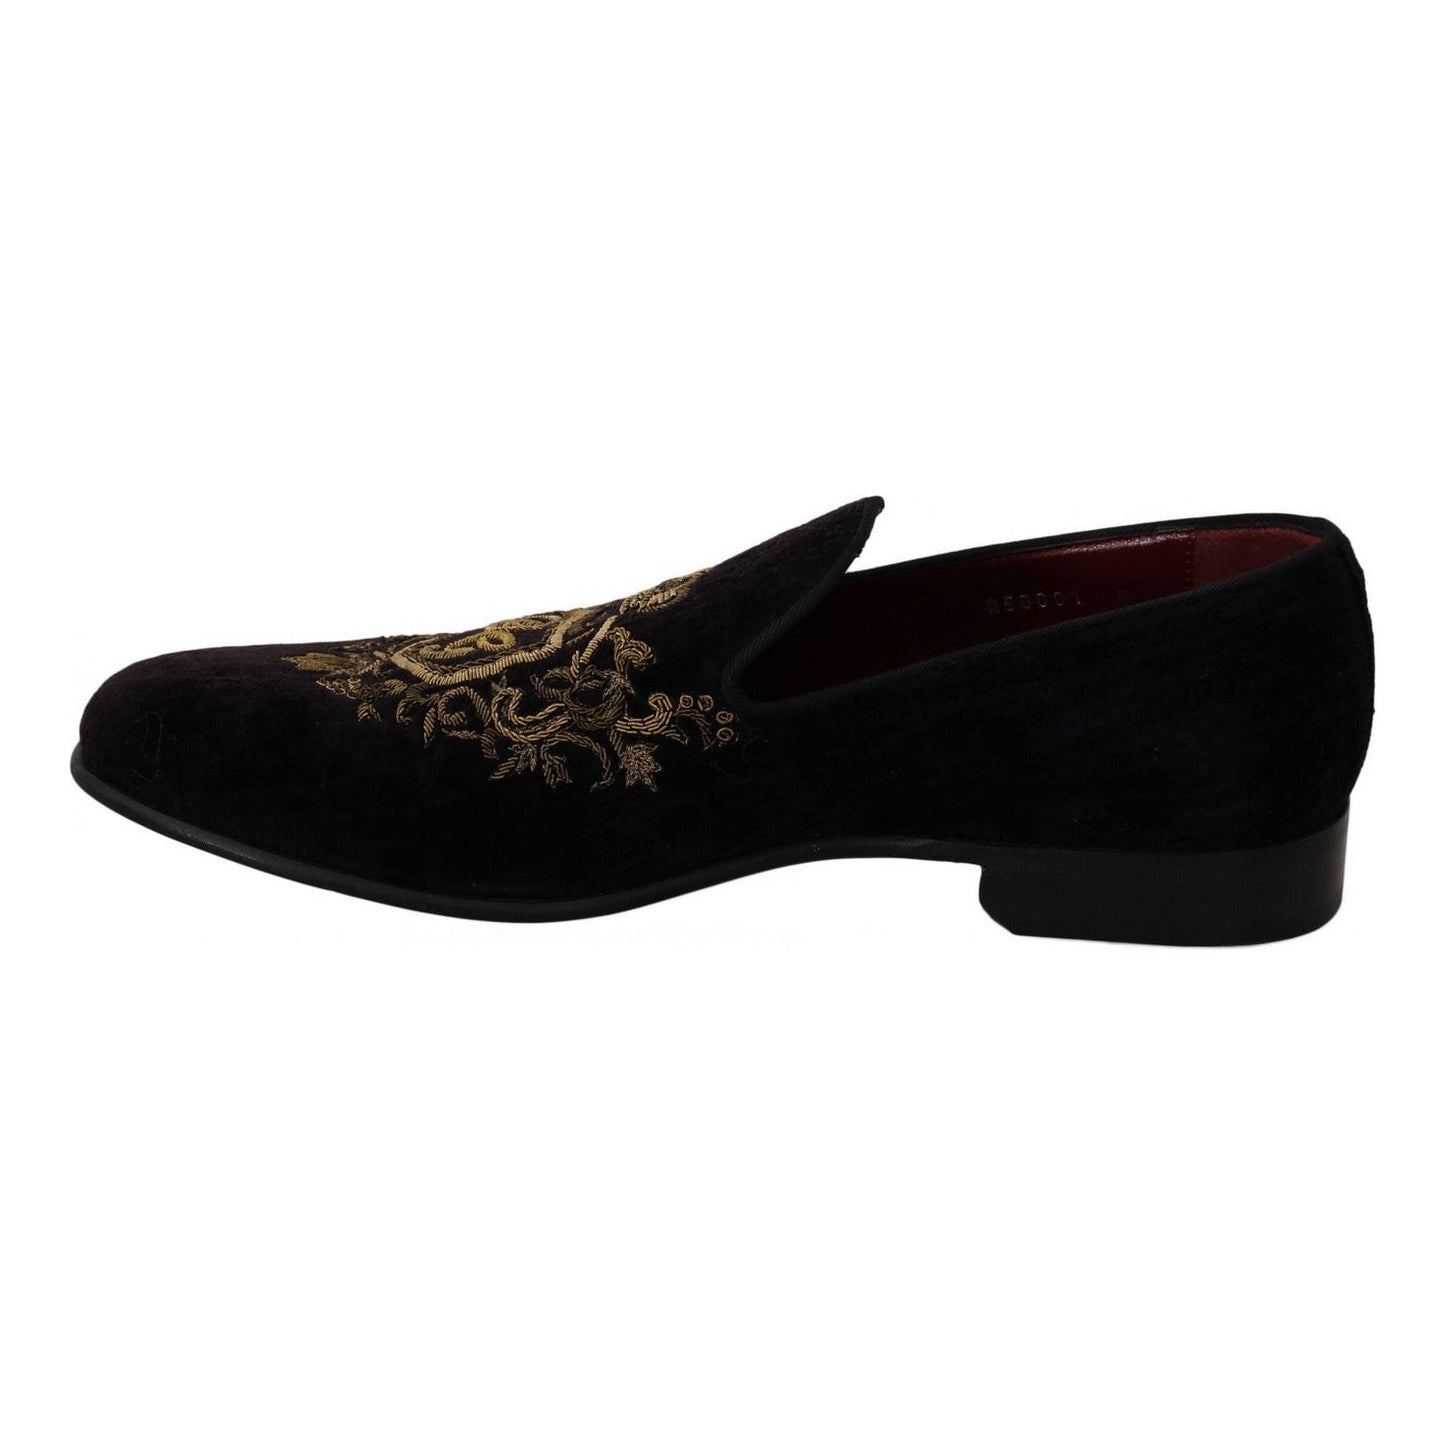 Dolce & Gabbana Elegant Black Loafers with Gold Crown Embroidery brown-suede-leather-stiletto-shoes-heels